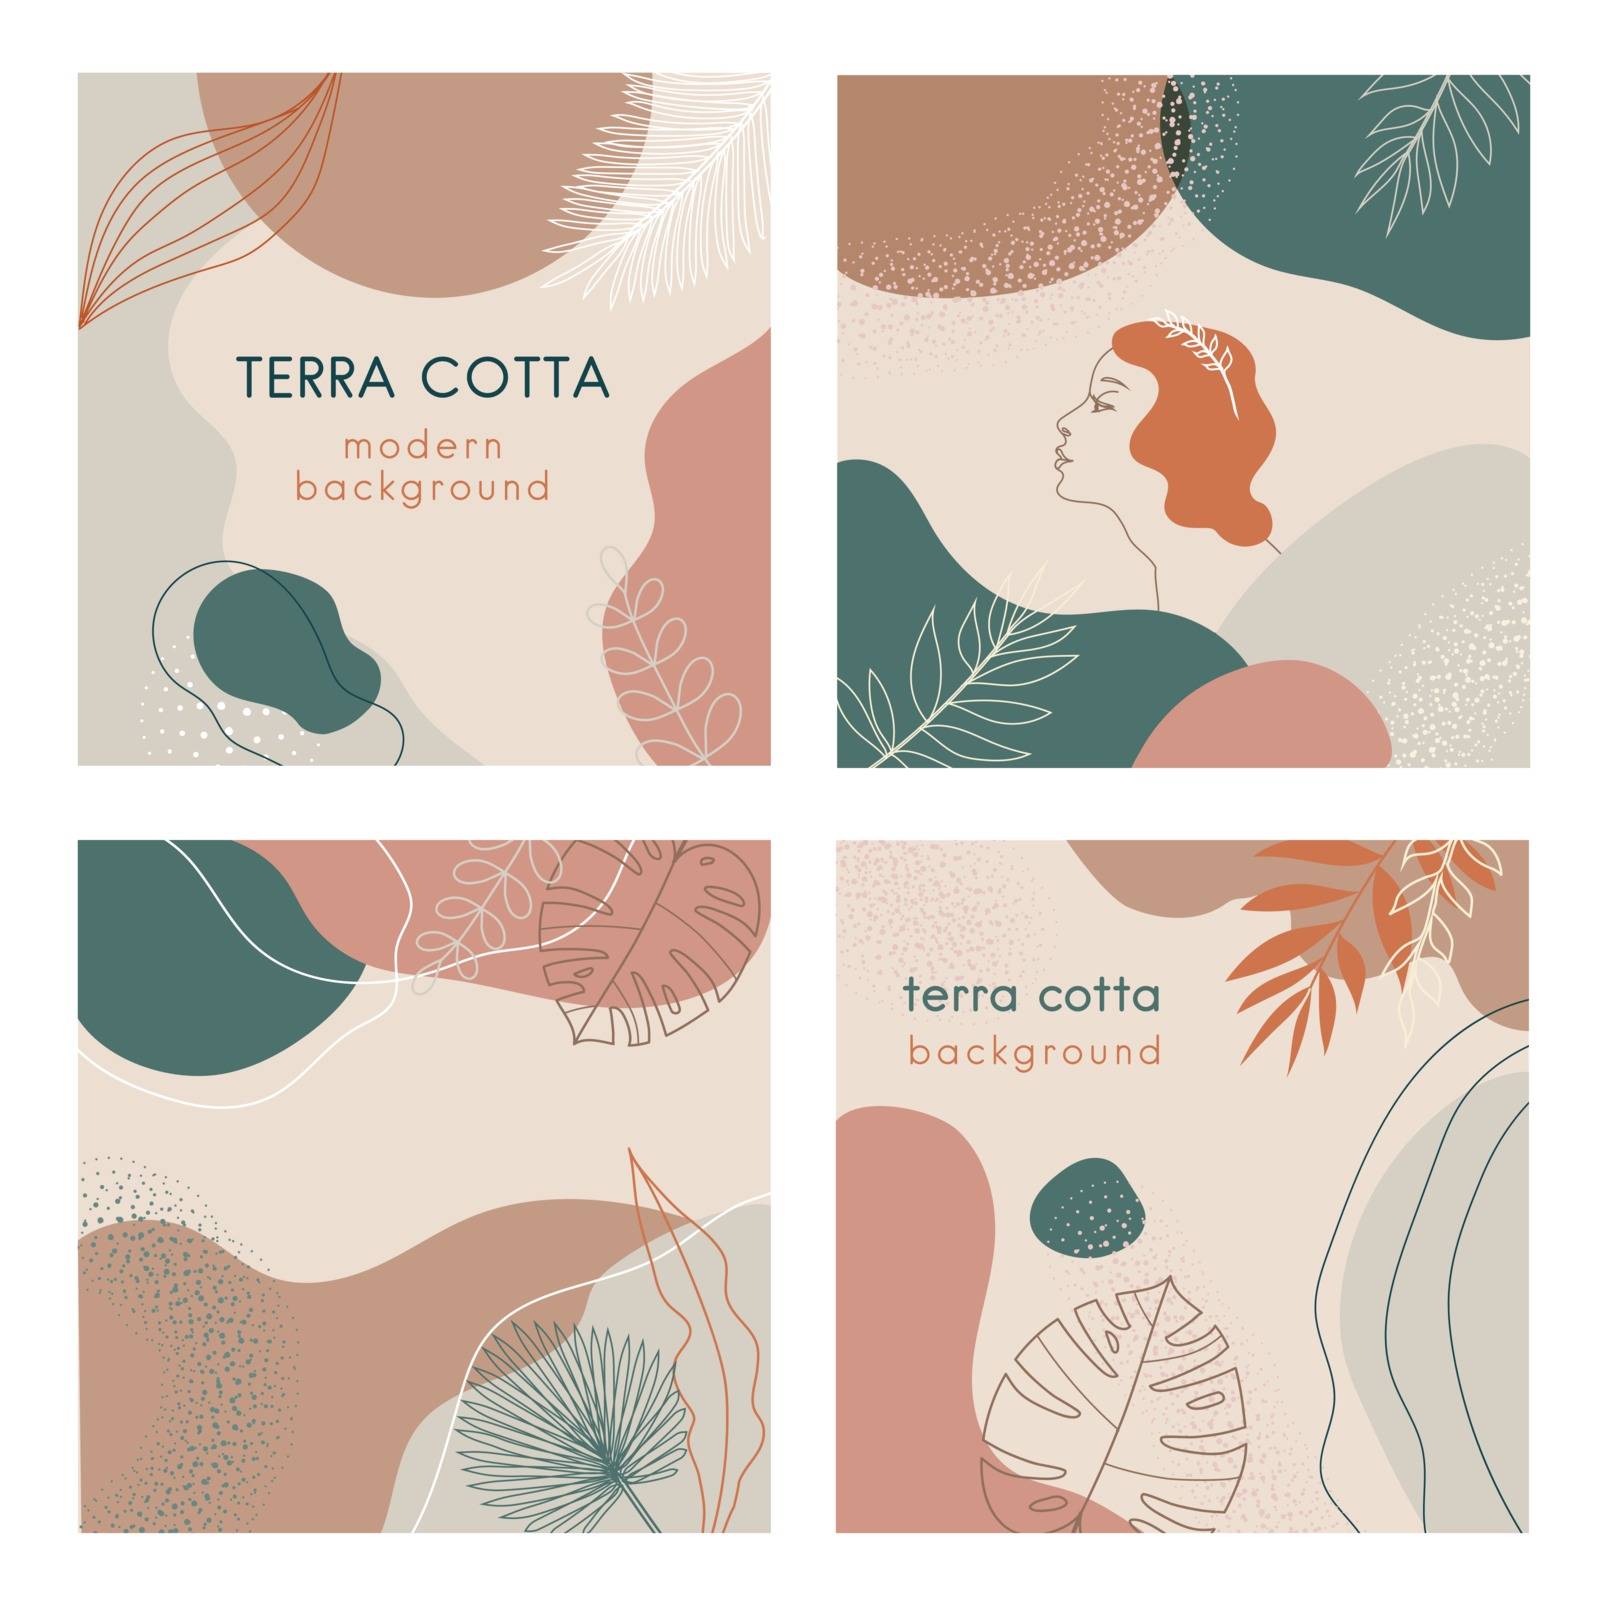 Terra cotta color Social media banners set of abstract modern backgrounds by Sofir